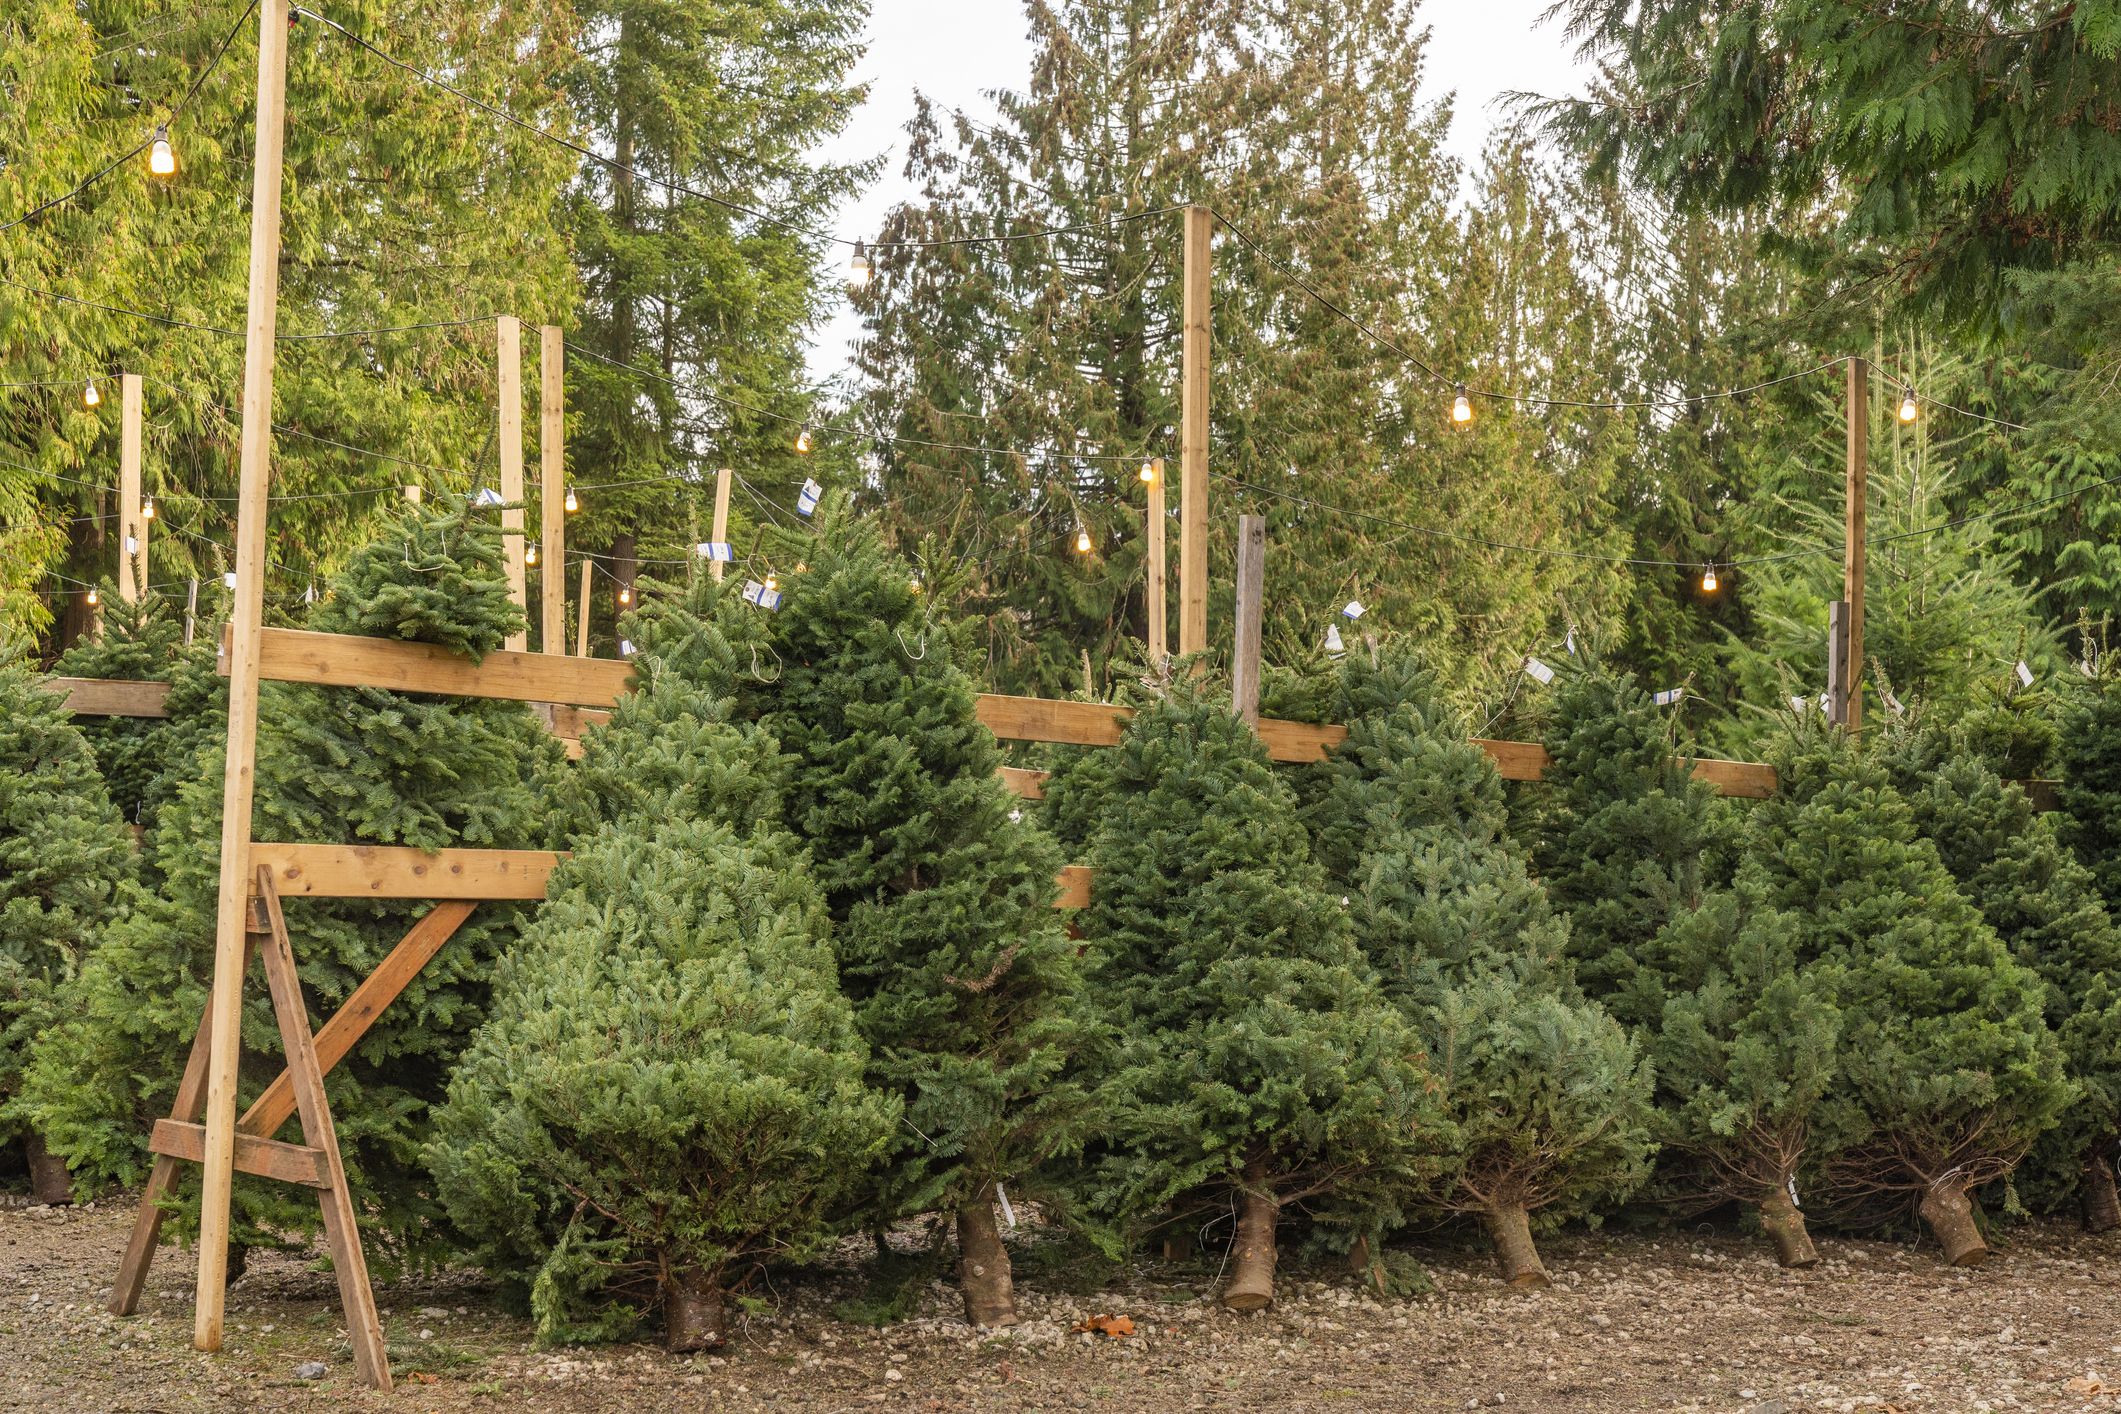 different types of evergreen trees